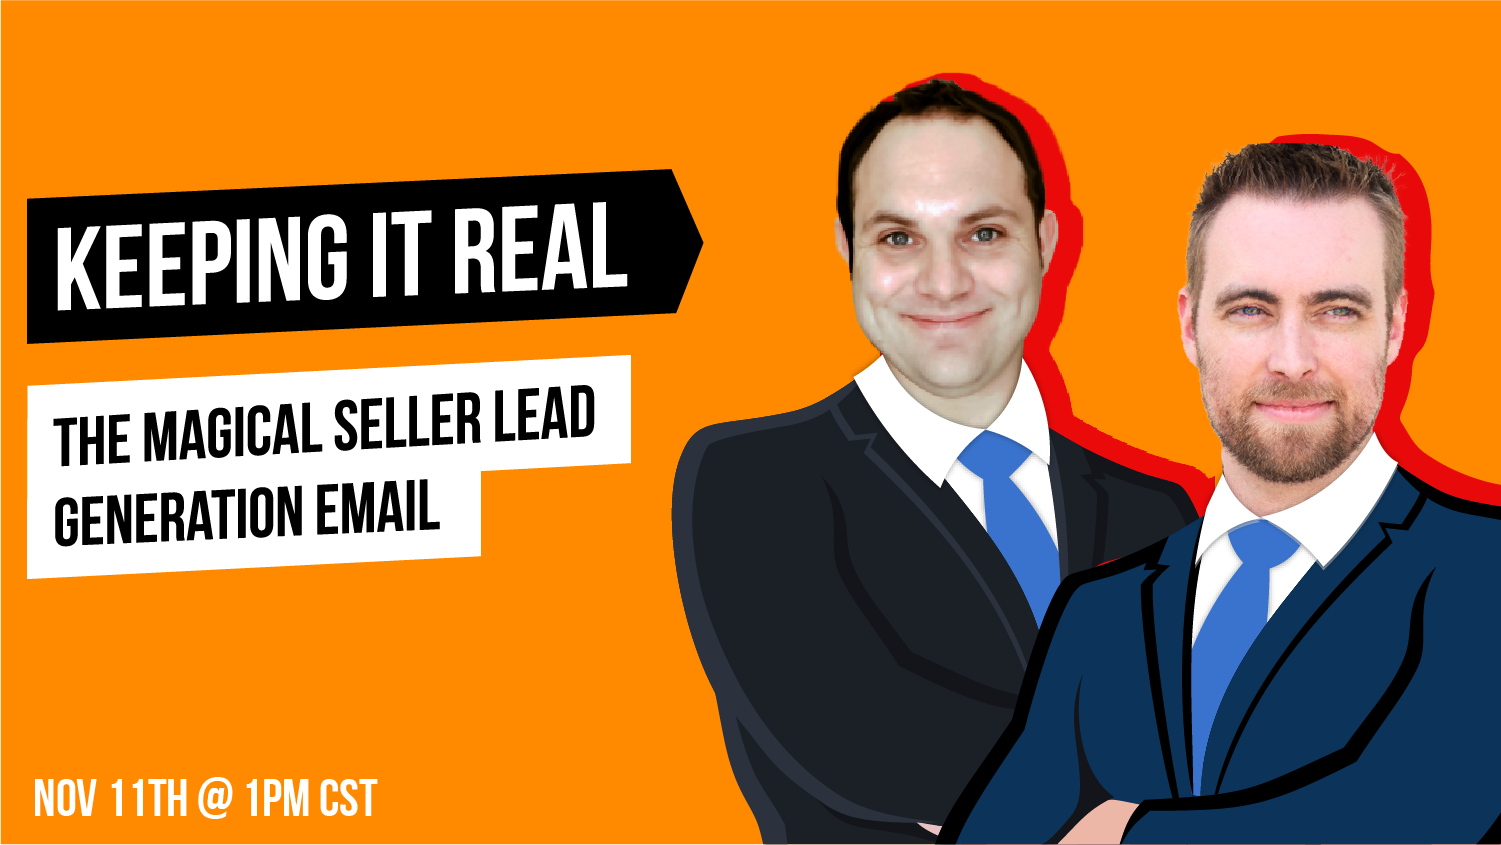 The Magical Seller Lead Generation Email